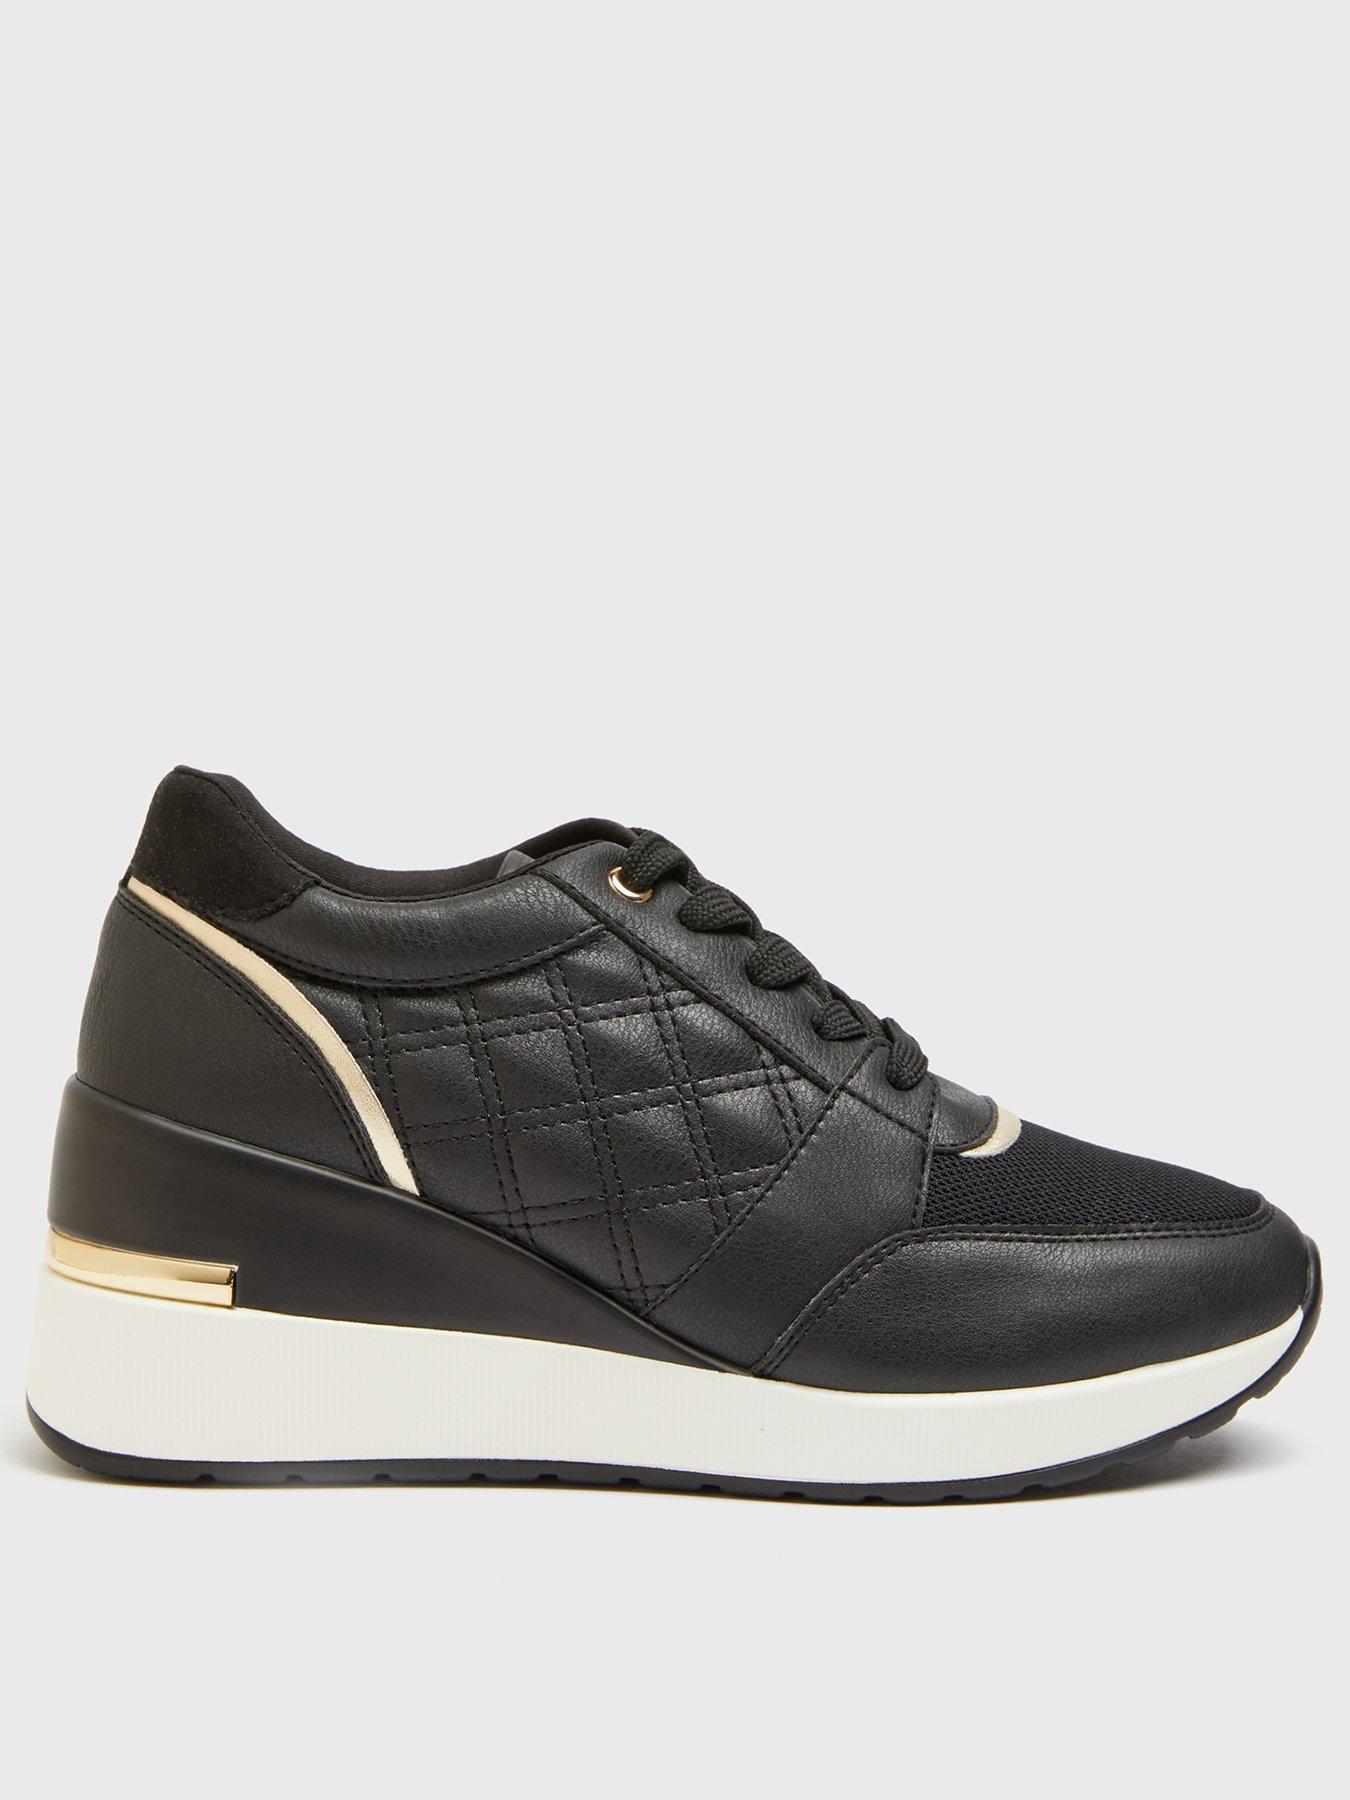  Black Quilted Metal Trim Wedge Trainers